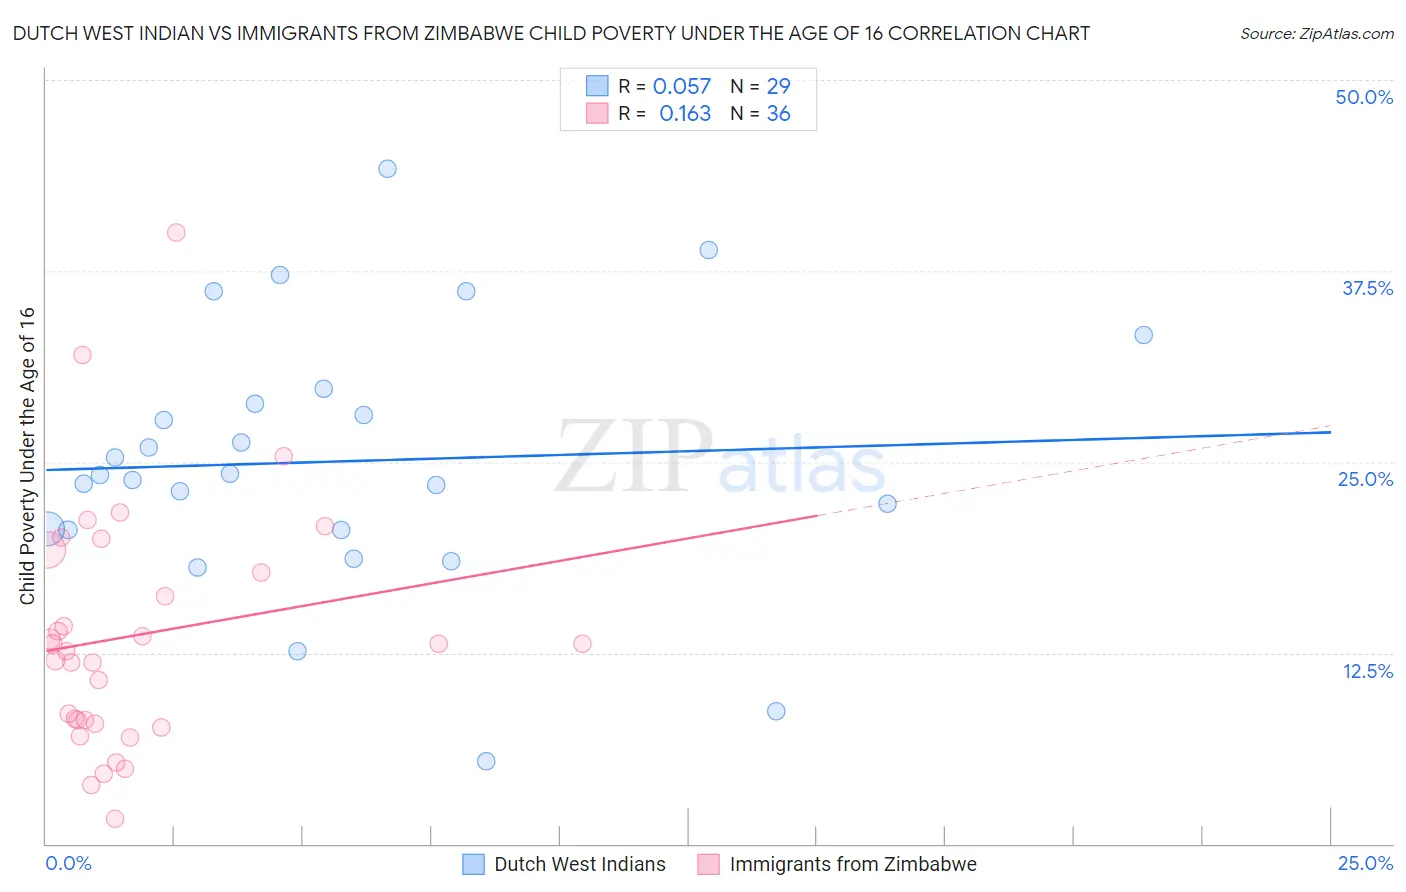 Dutch West Indian vs Immigrants from Zimbabwe Child Poverty Under the Age of 16